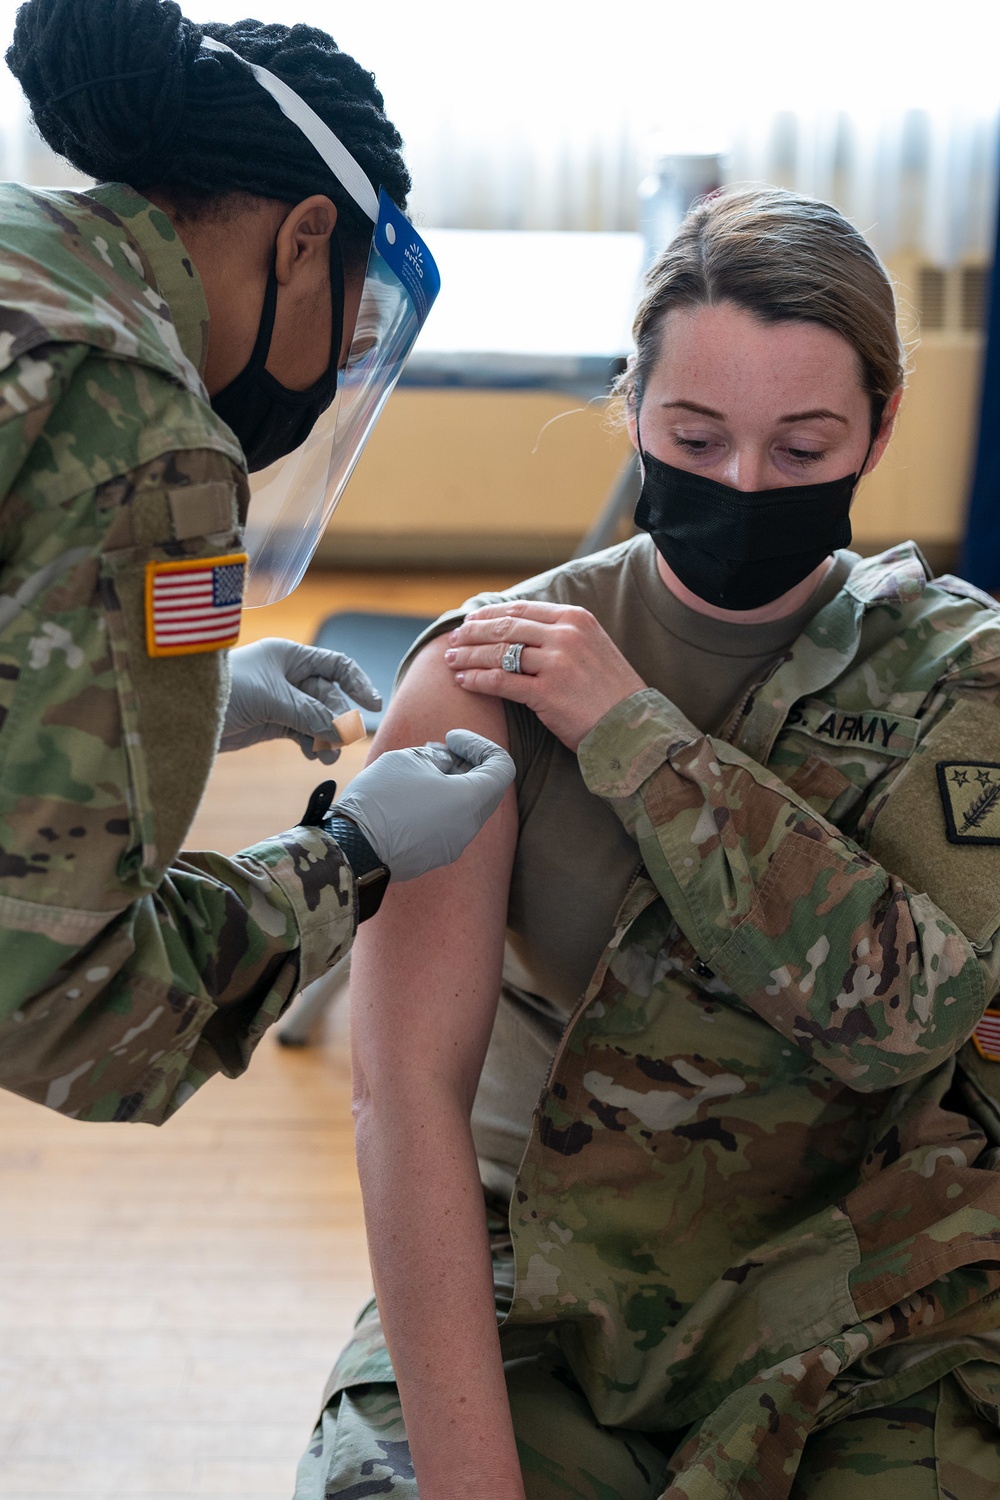 Army public health experts say vigilance still needed in COVID-19 pandemic